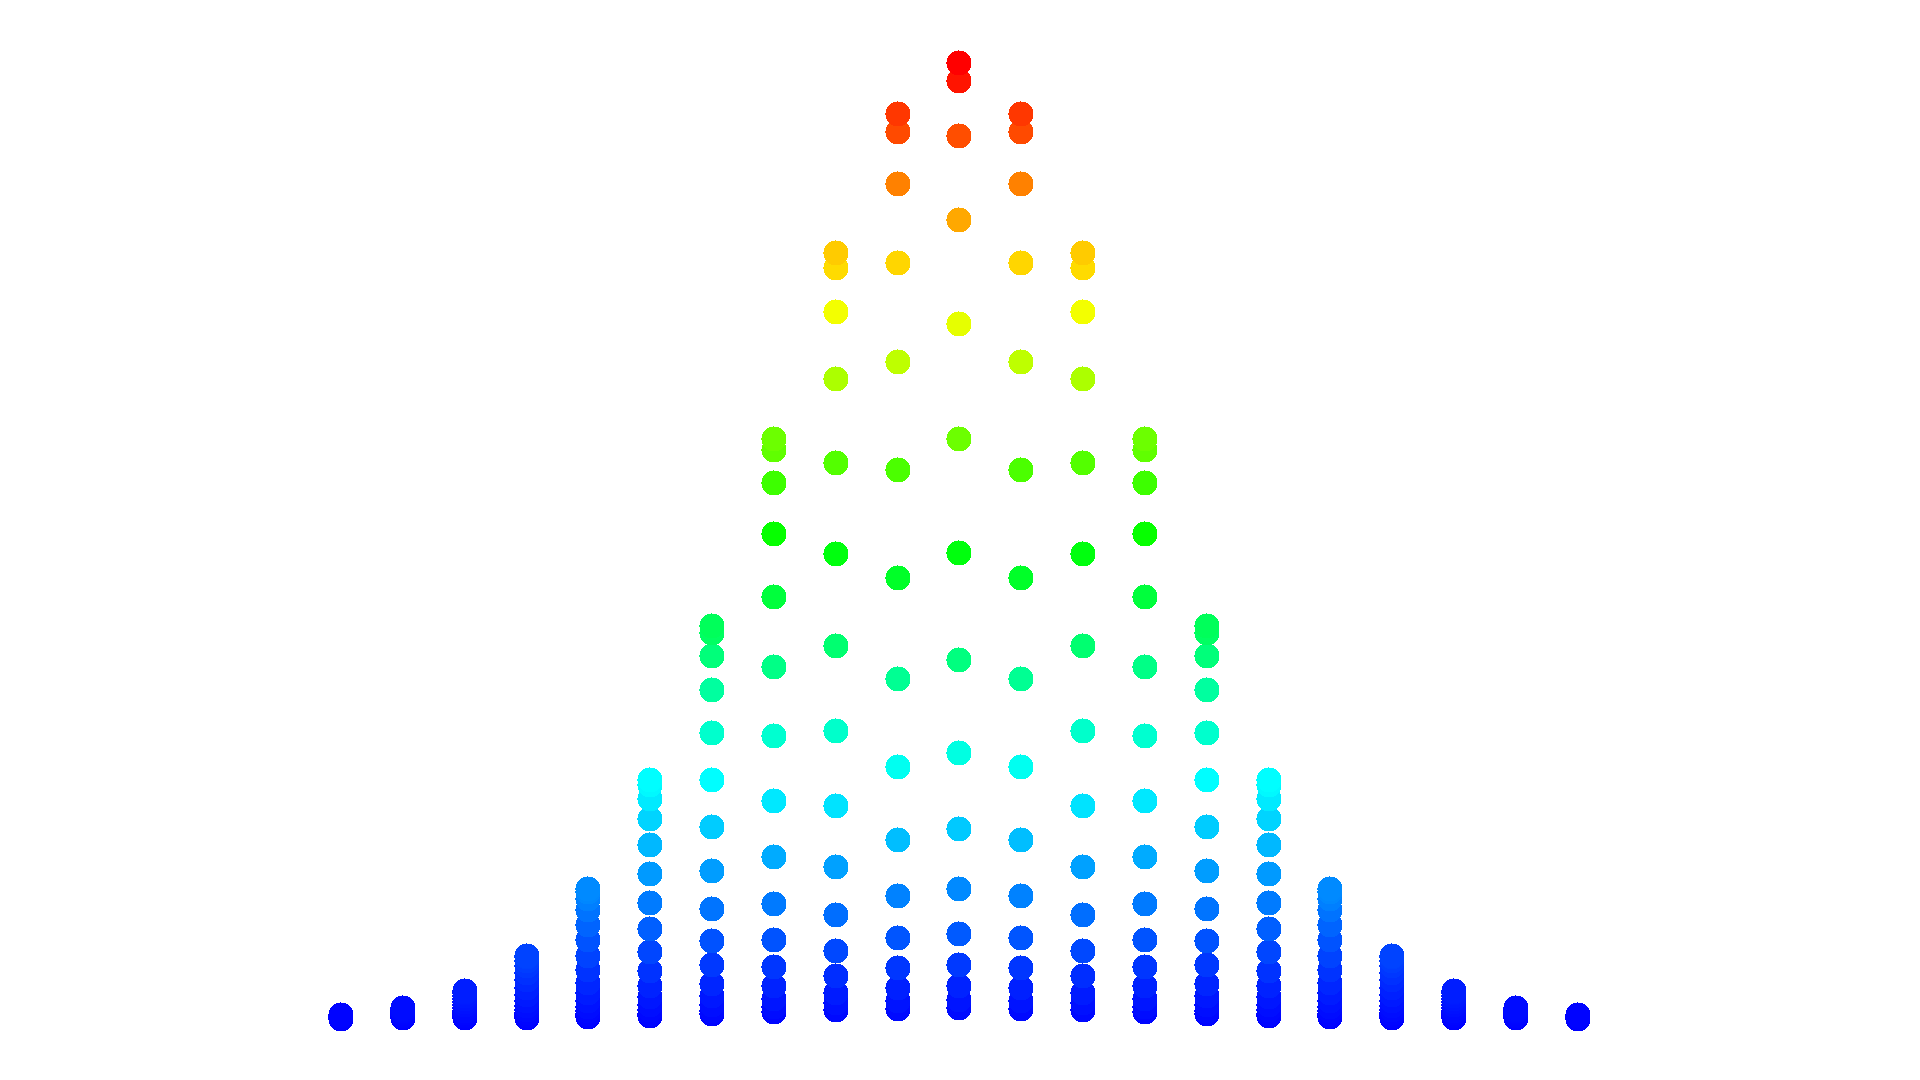 Example 13: Four-colored 2D-Plot